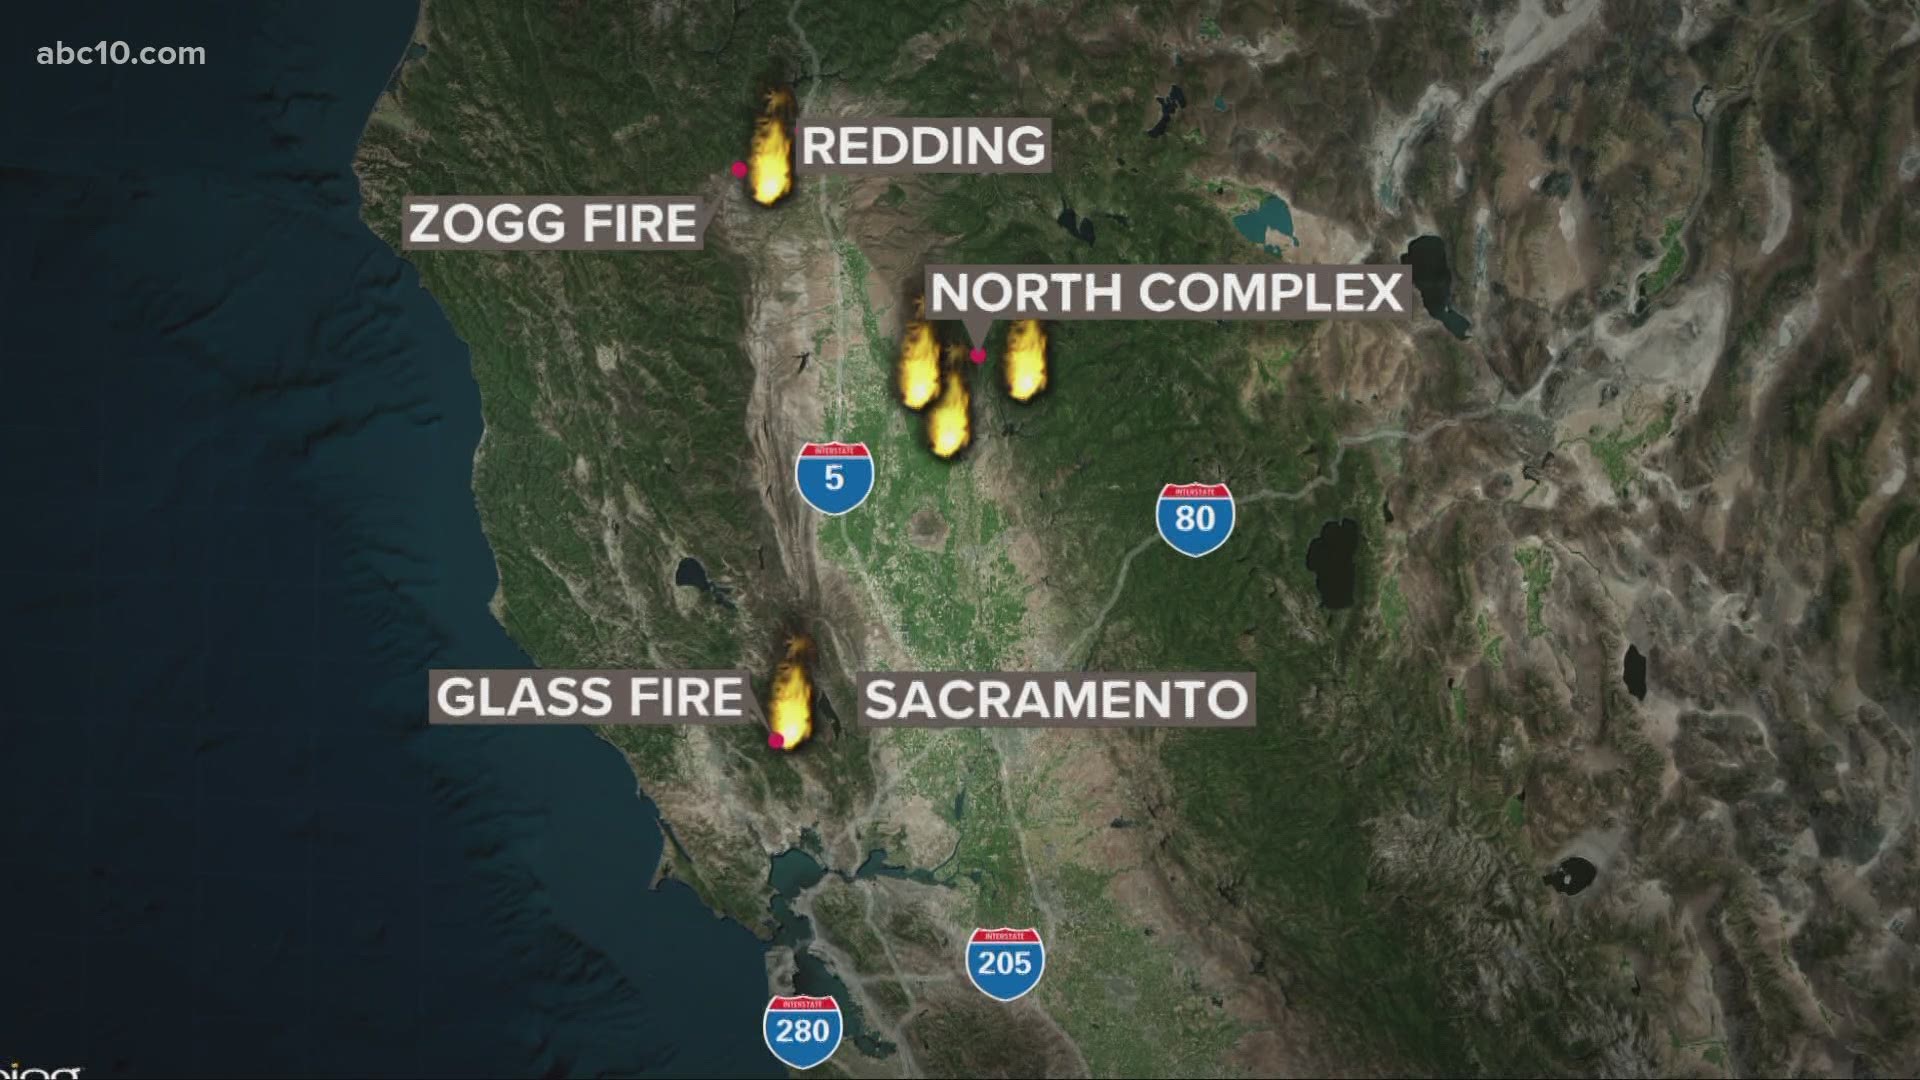 Fires burn across California, causing evacuations and road closures in Napa and Sonoma counties, near the town of Santa Rosa.